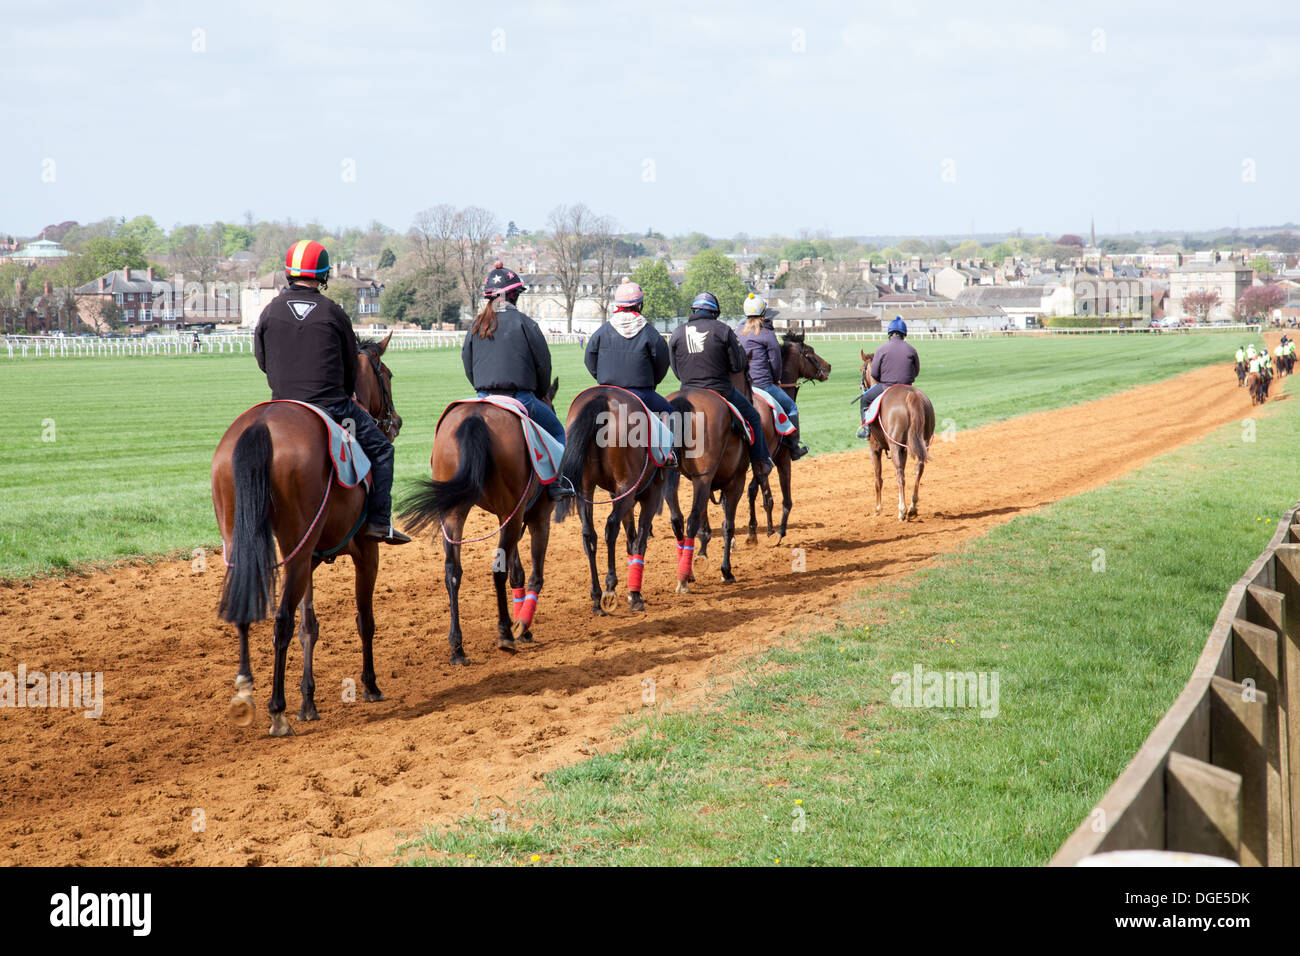 Newmarket Gallops,500 acres,Training Grounds, 50 miles of turf gallops, 14 miles of artificial tracks. Use daily by 3000 horses. Jockey Club Estates. Stock Photo